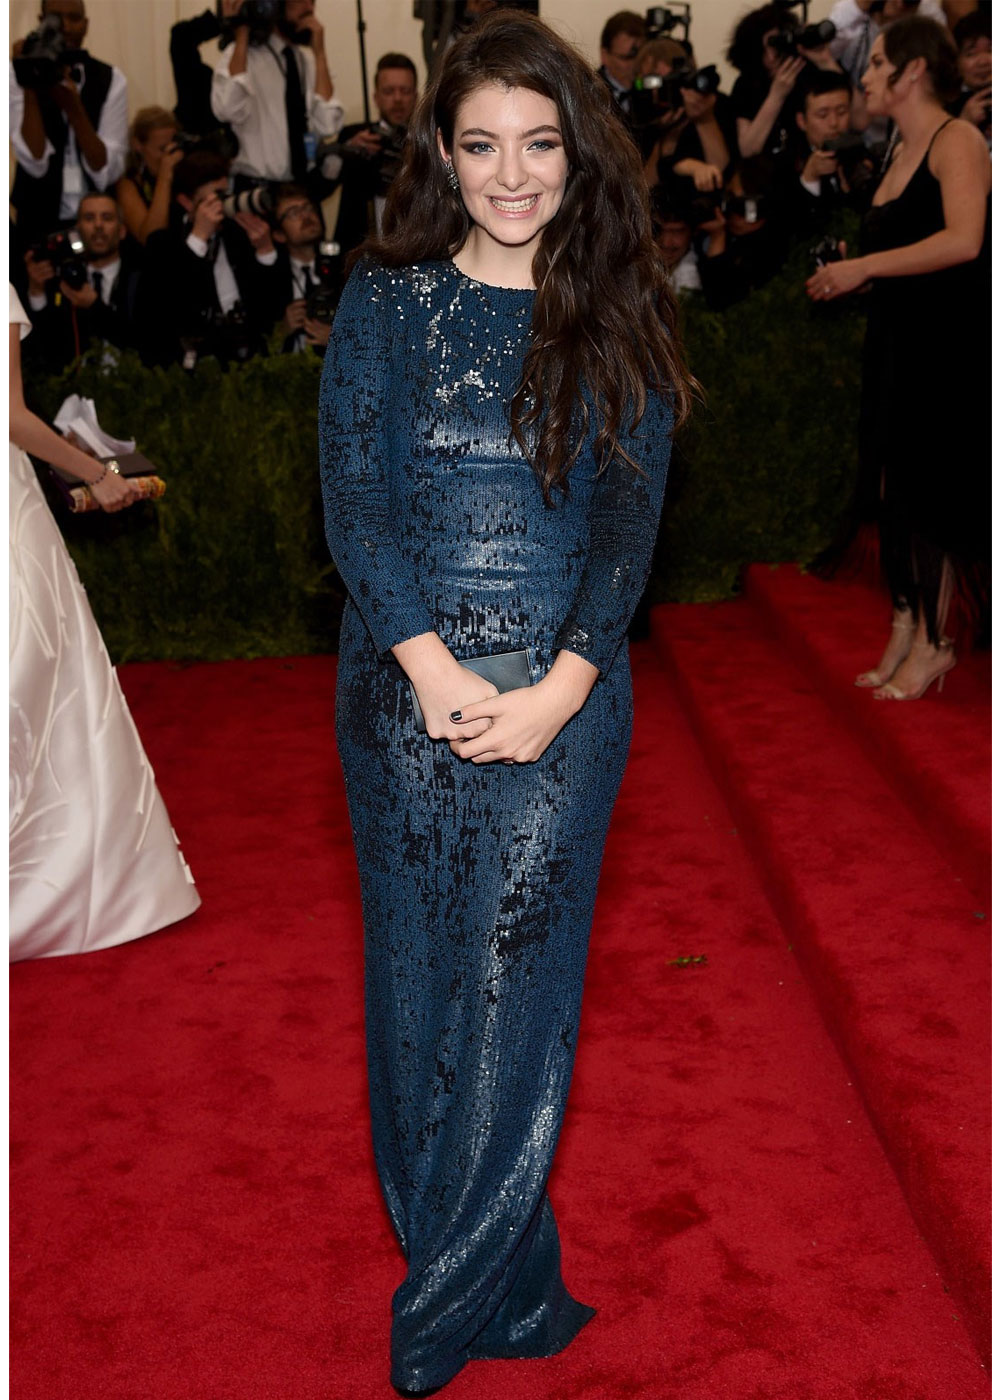 For the 2015 Met Gala, Lorde wore a navy Calvin Klein gown.